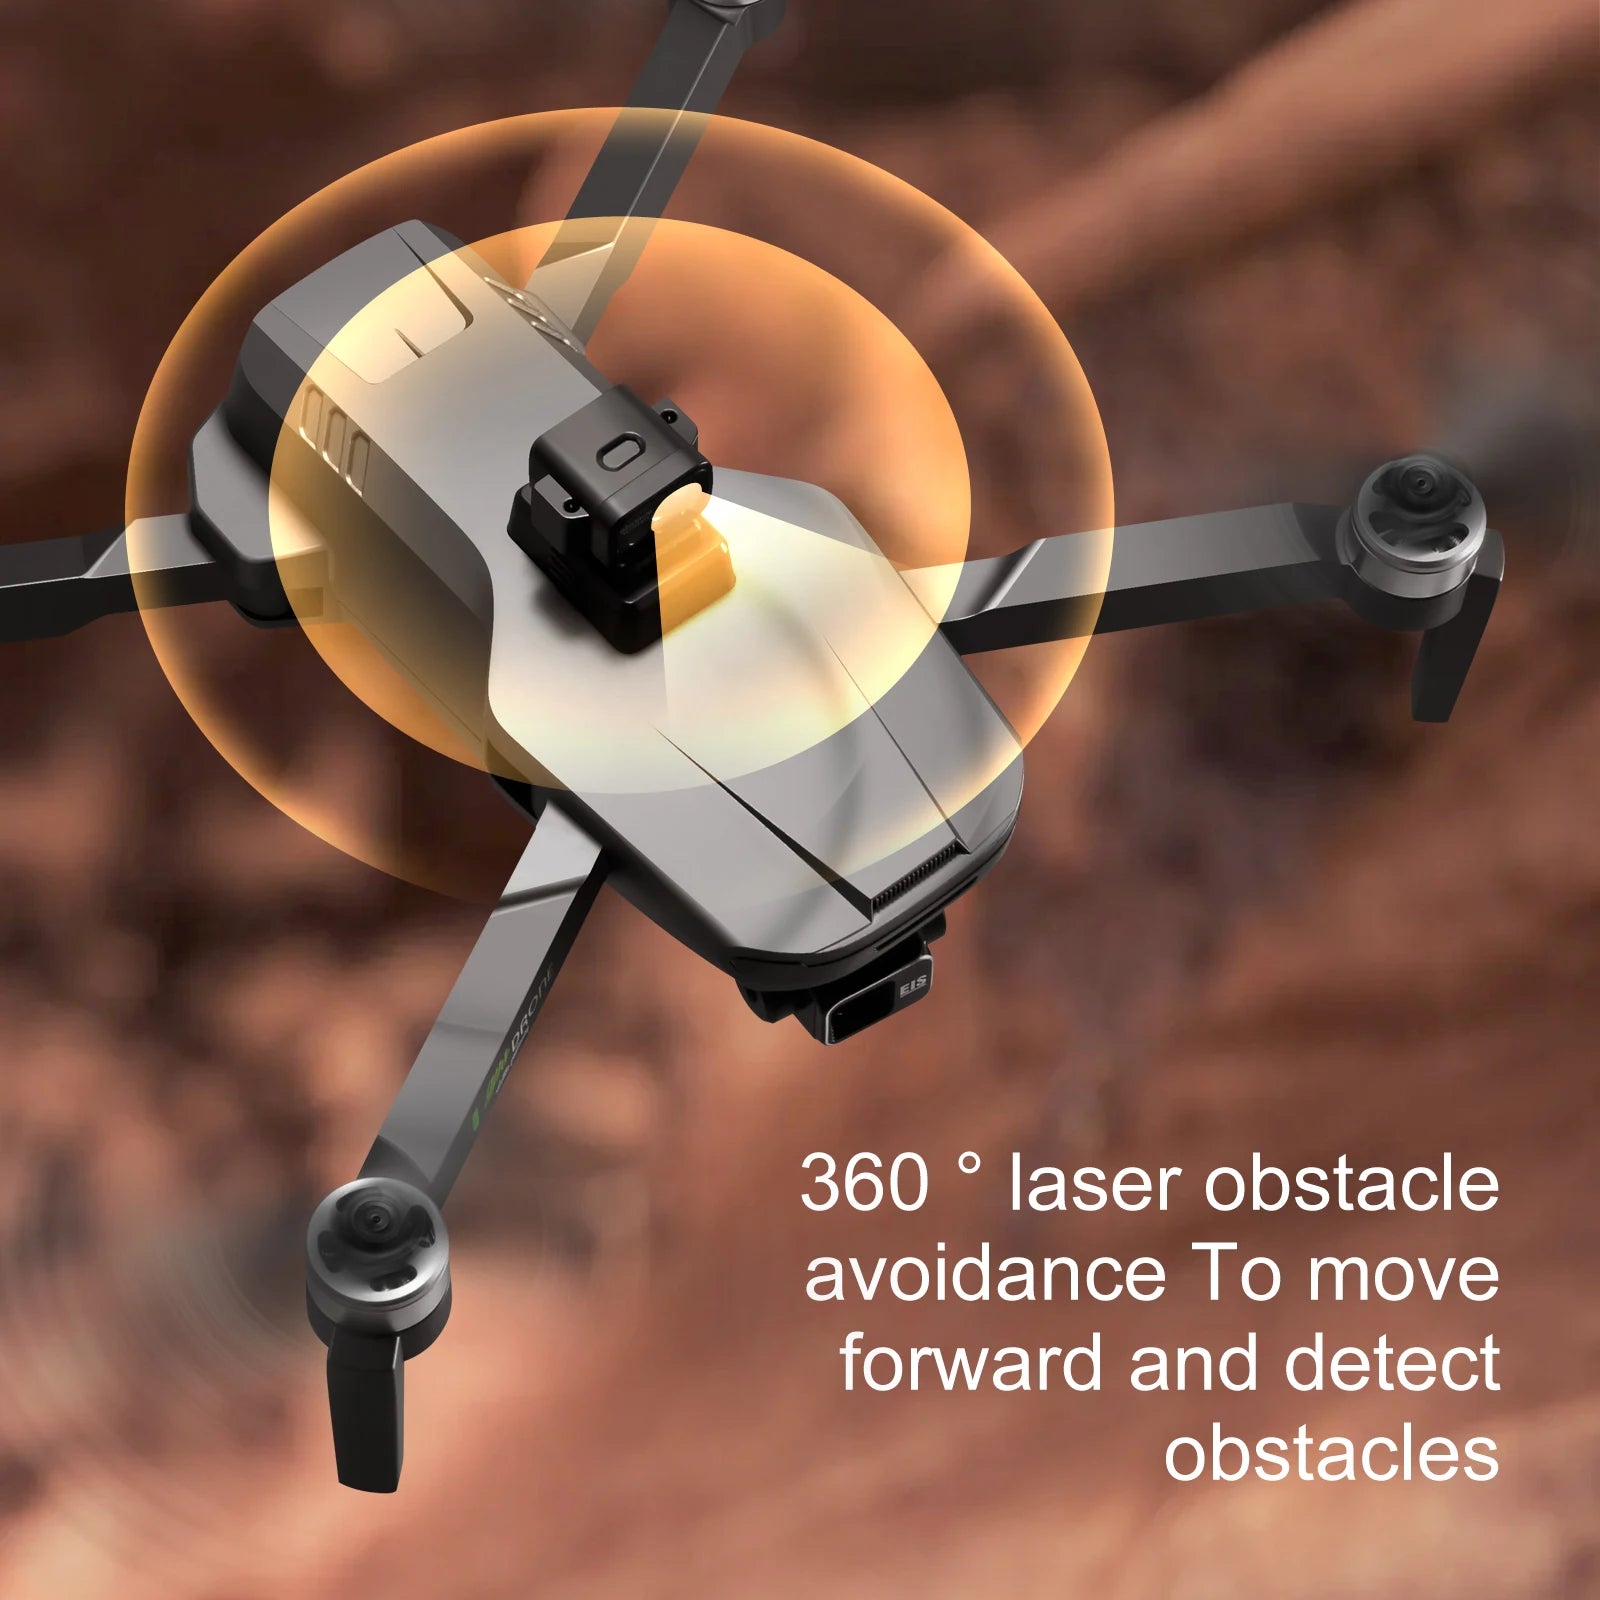 S155 Pro GPS Drone, 360-degree laser obstacle avoidance To move forward